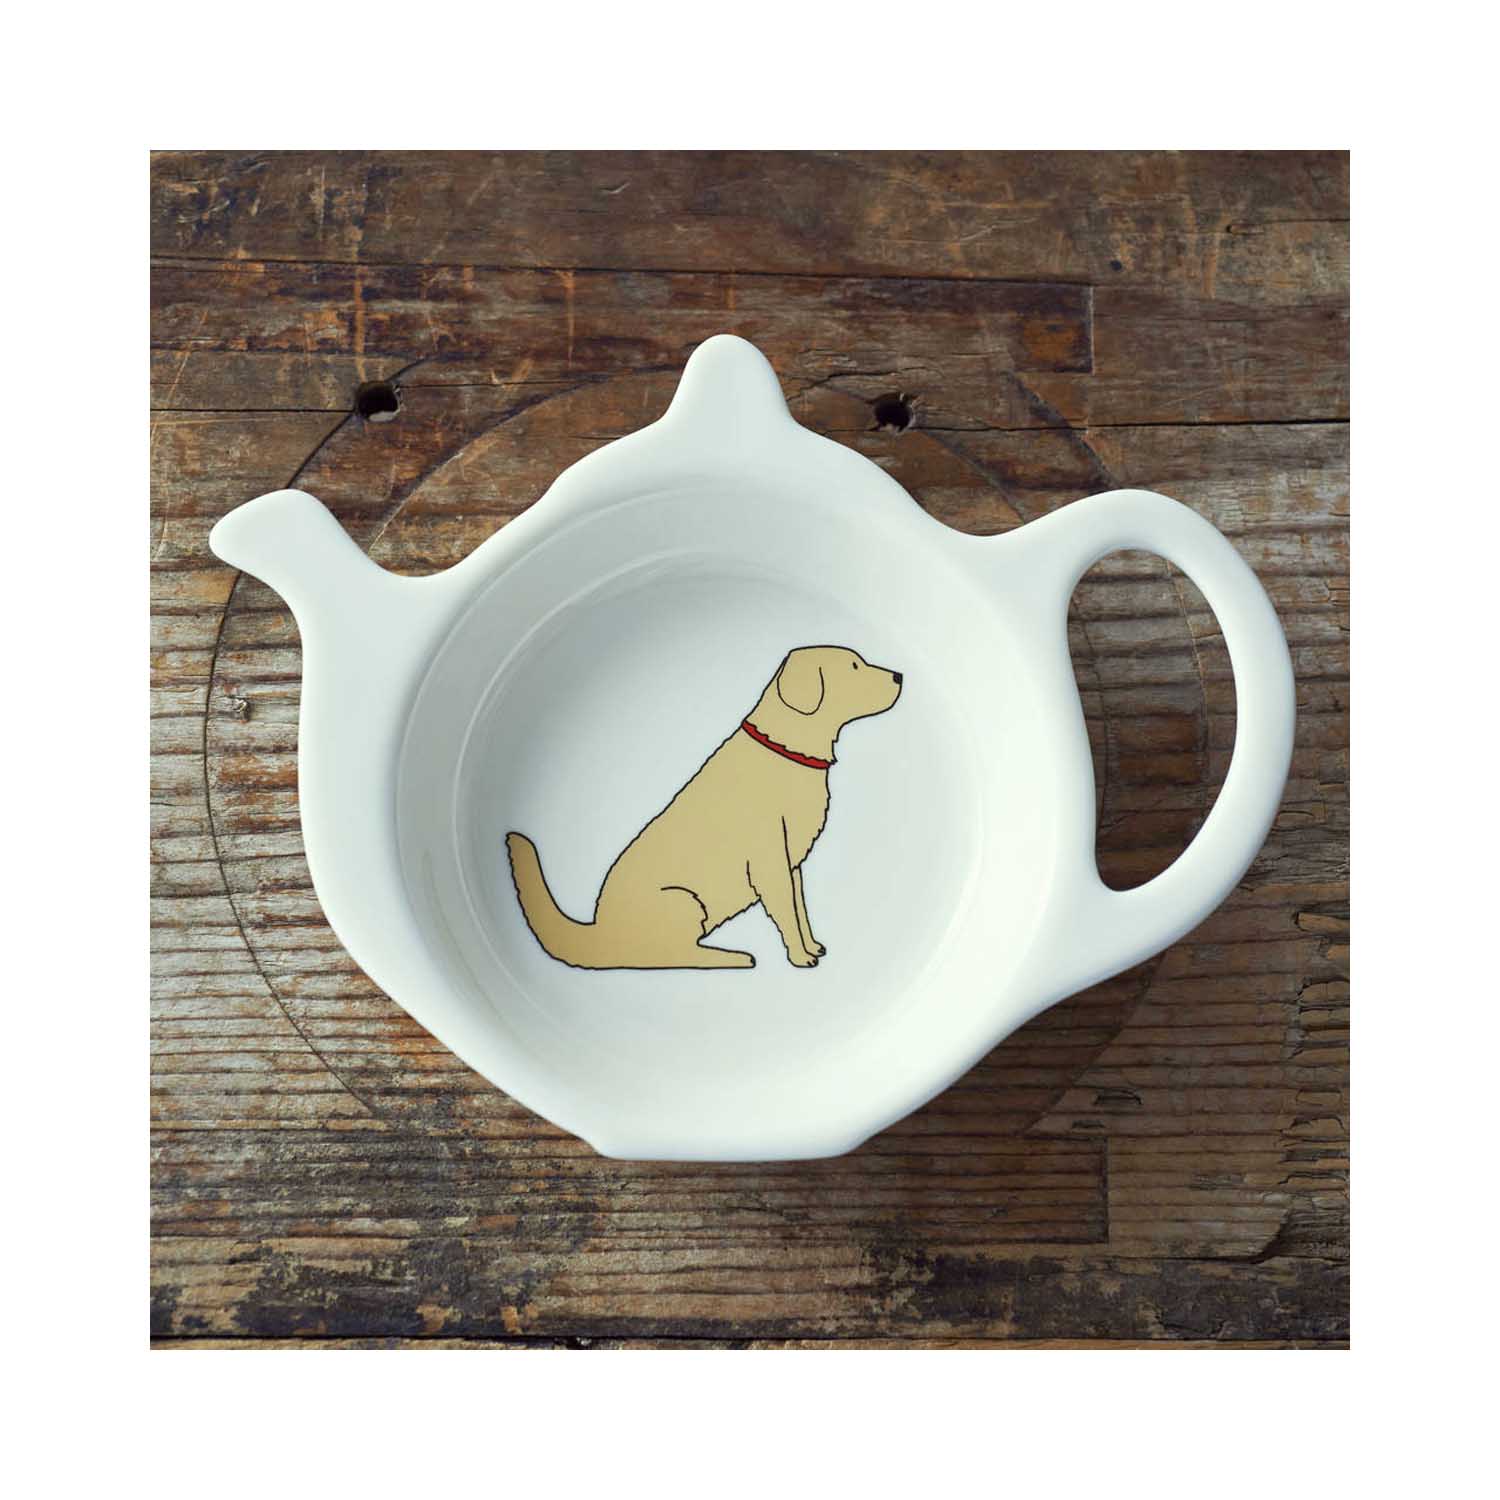 Dog Lover Gifts available at Dog Krazy Gifts - Noah The Golden Retriever  Teabag Dish - part of the Sweet William range available from www.DogKrazyGifts.co.uk 